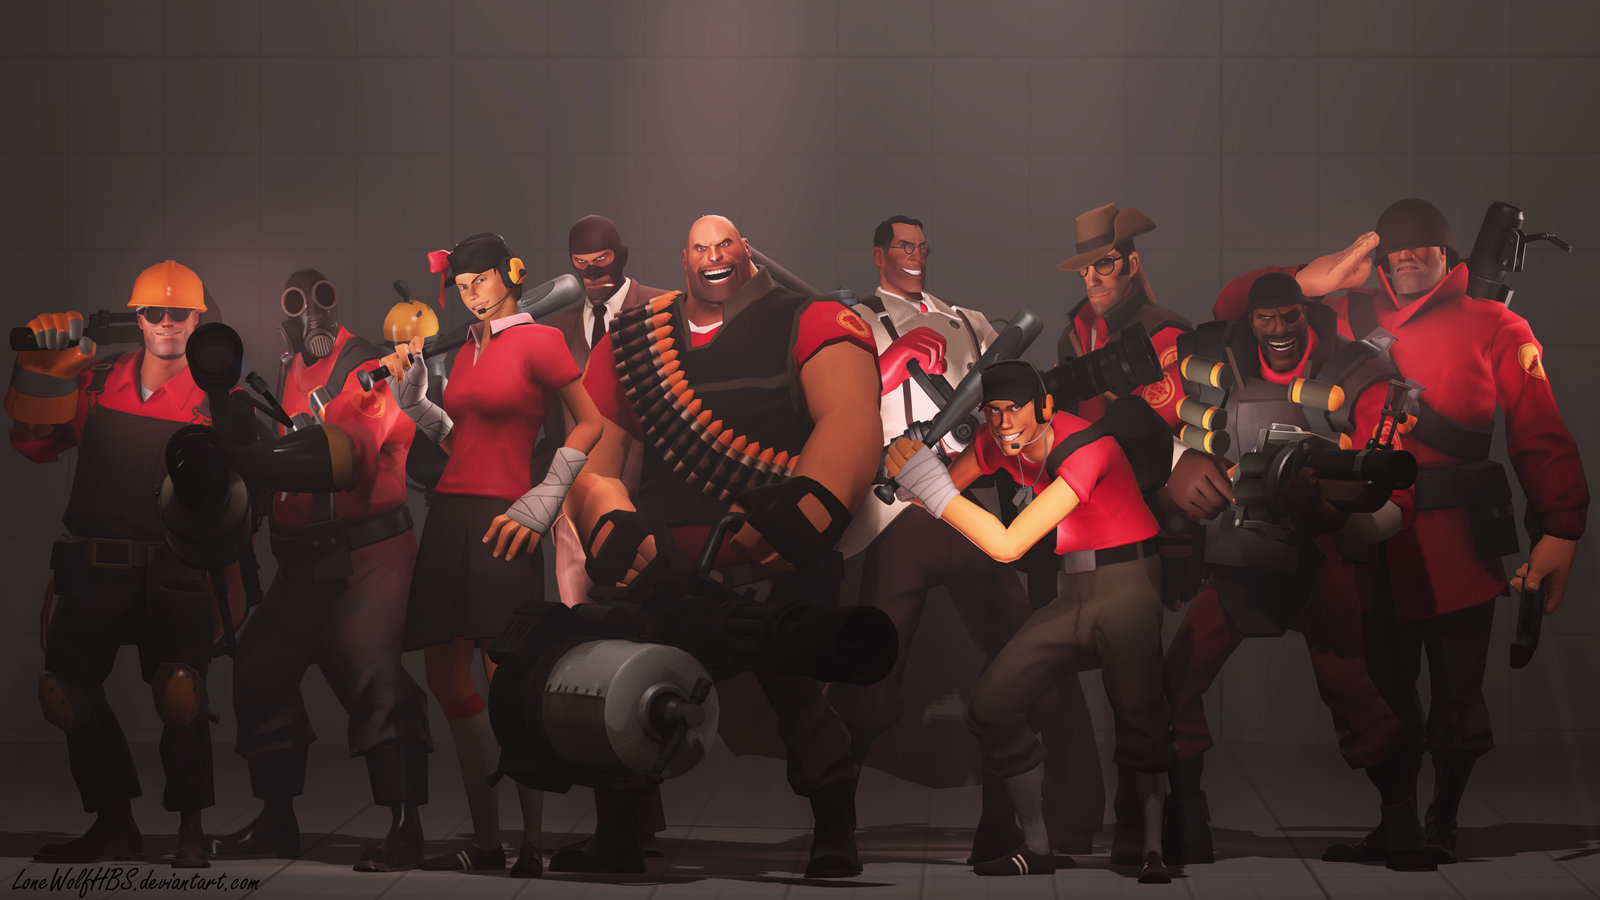 team fortress 2 characters tvtropes